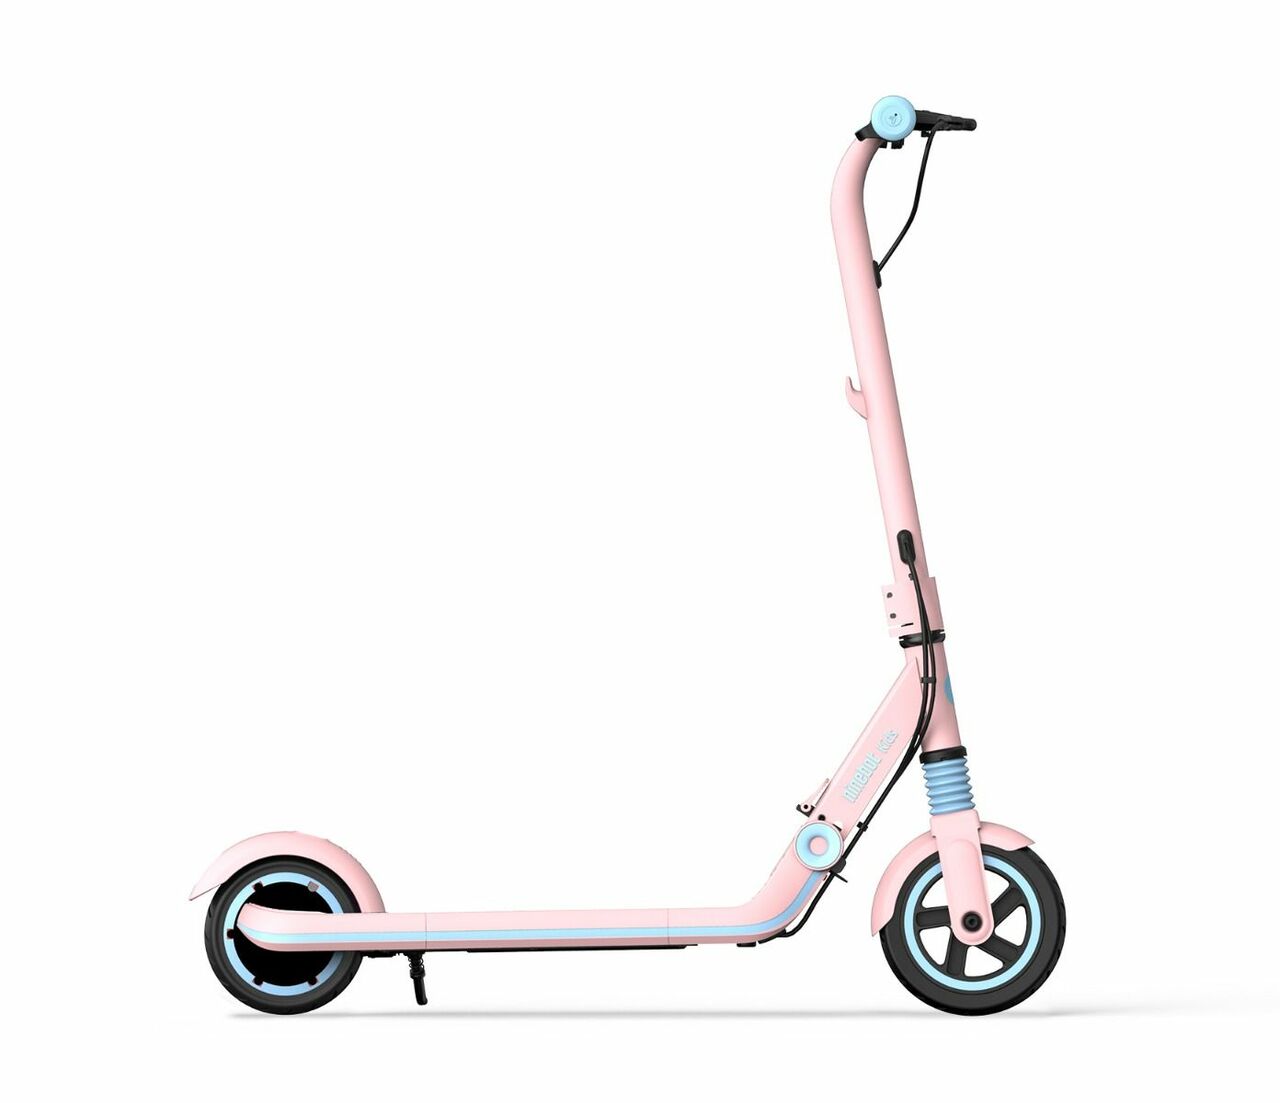 Segway Ninebot Zing E8 electric kickscooter for kids ages 6 to 12 years old. Pink model. Safe and easy to ride. Foldable and portable.